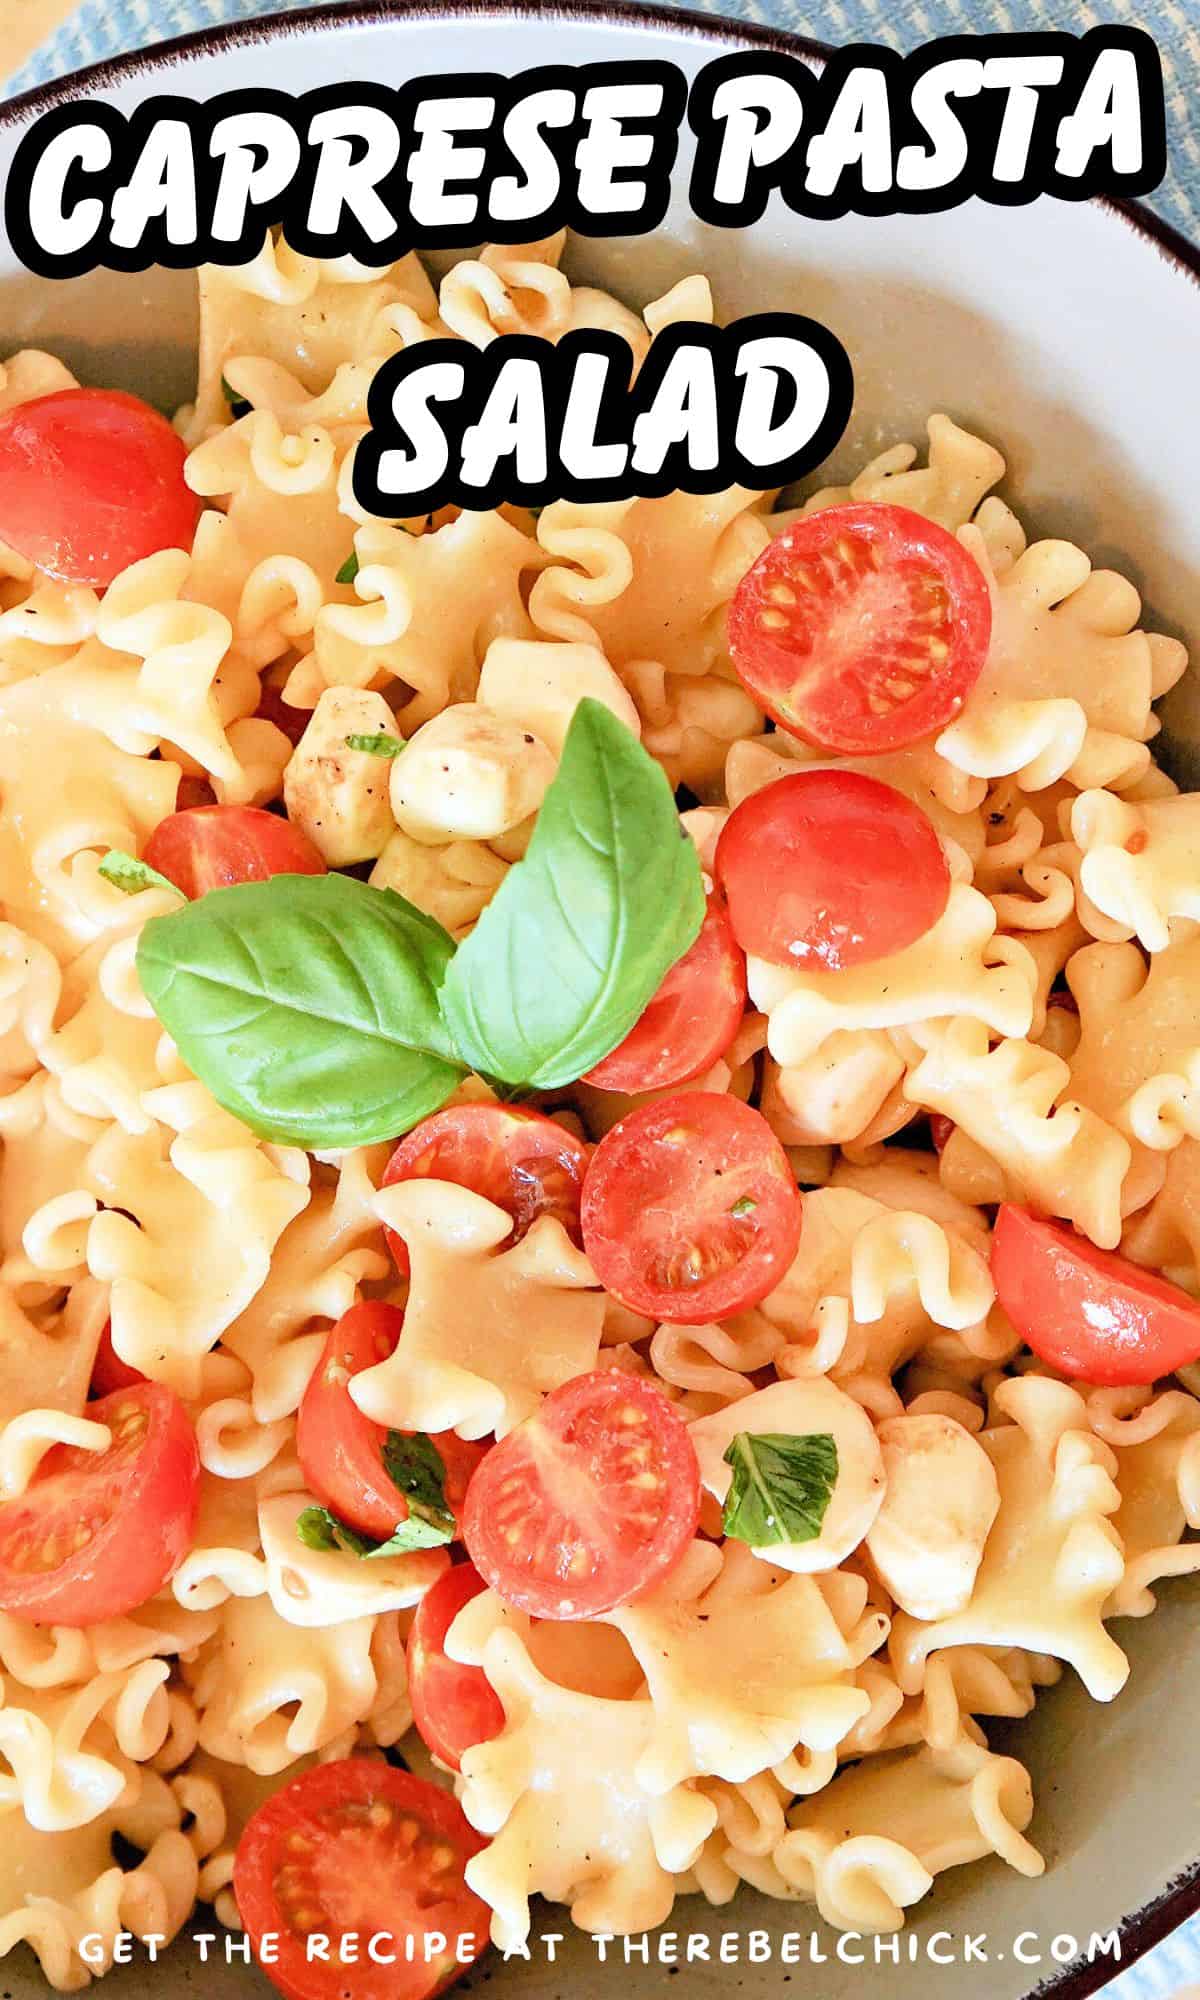 Overhead view of a bowl of pasta salad filled with cherry tomatoes and mozzarella pearls and fresh basil